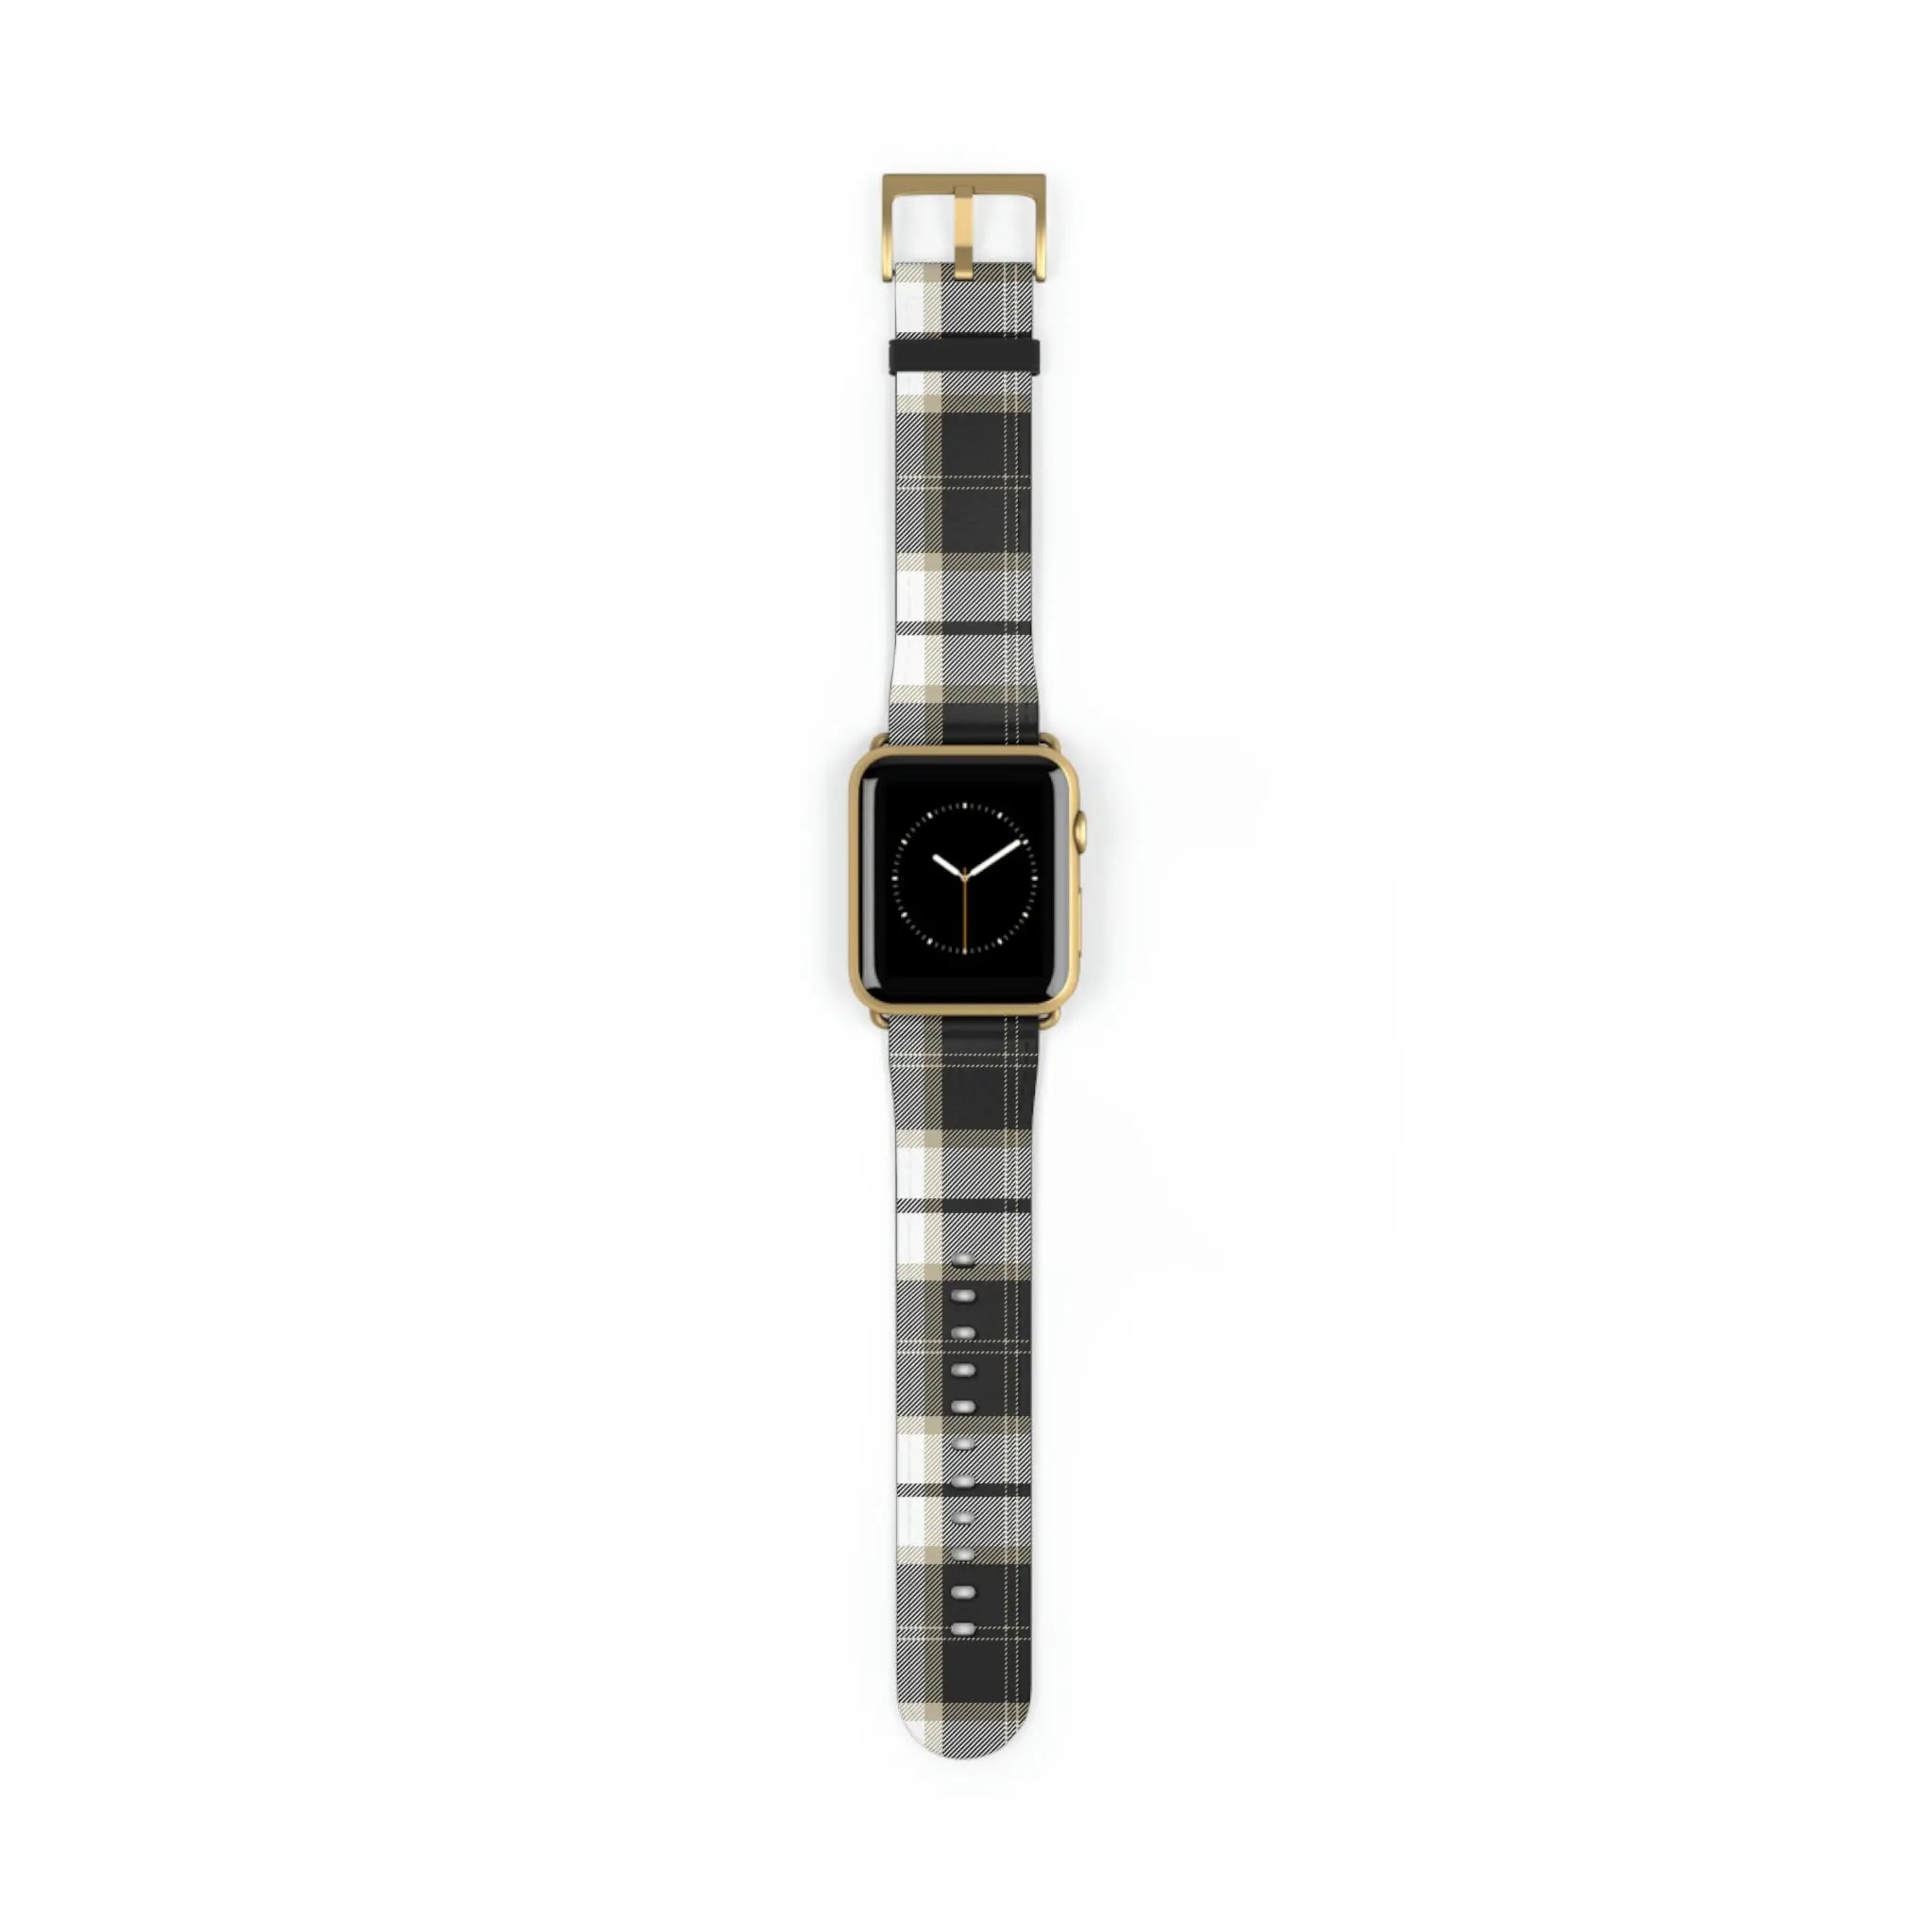  Designer Collection in Plaid (Grey Mix) Apple Watch Band Watch Band42-45mmGoldMatte